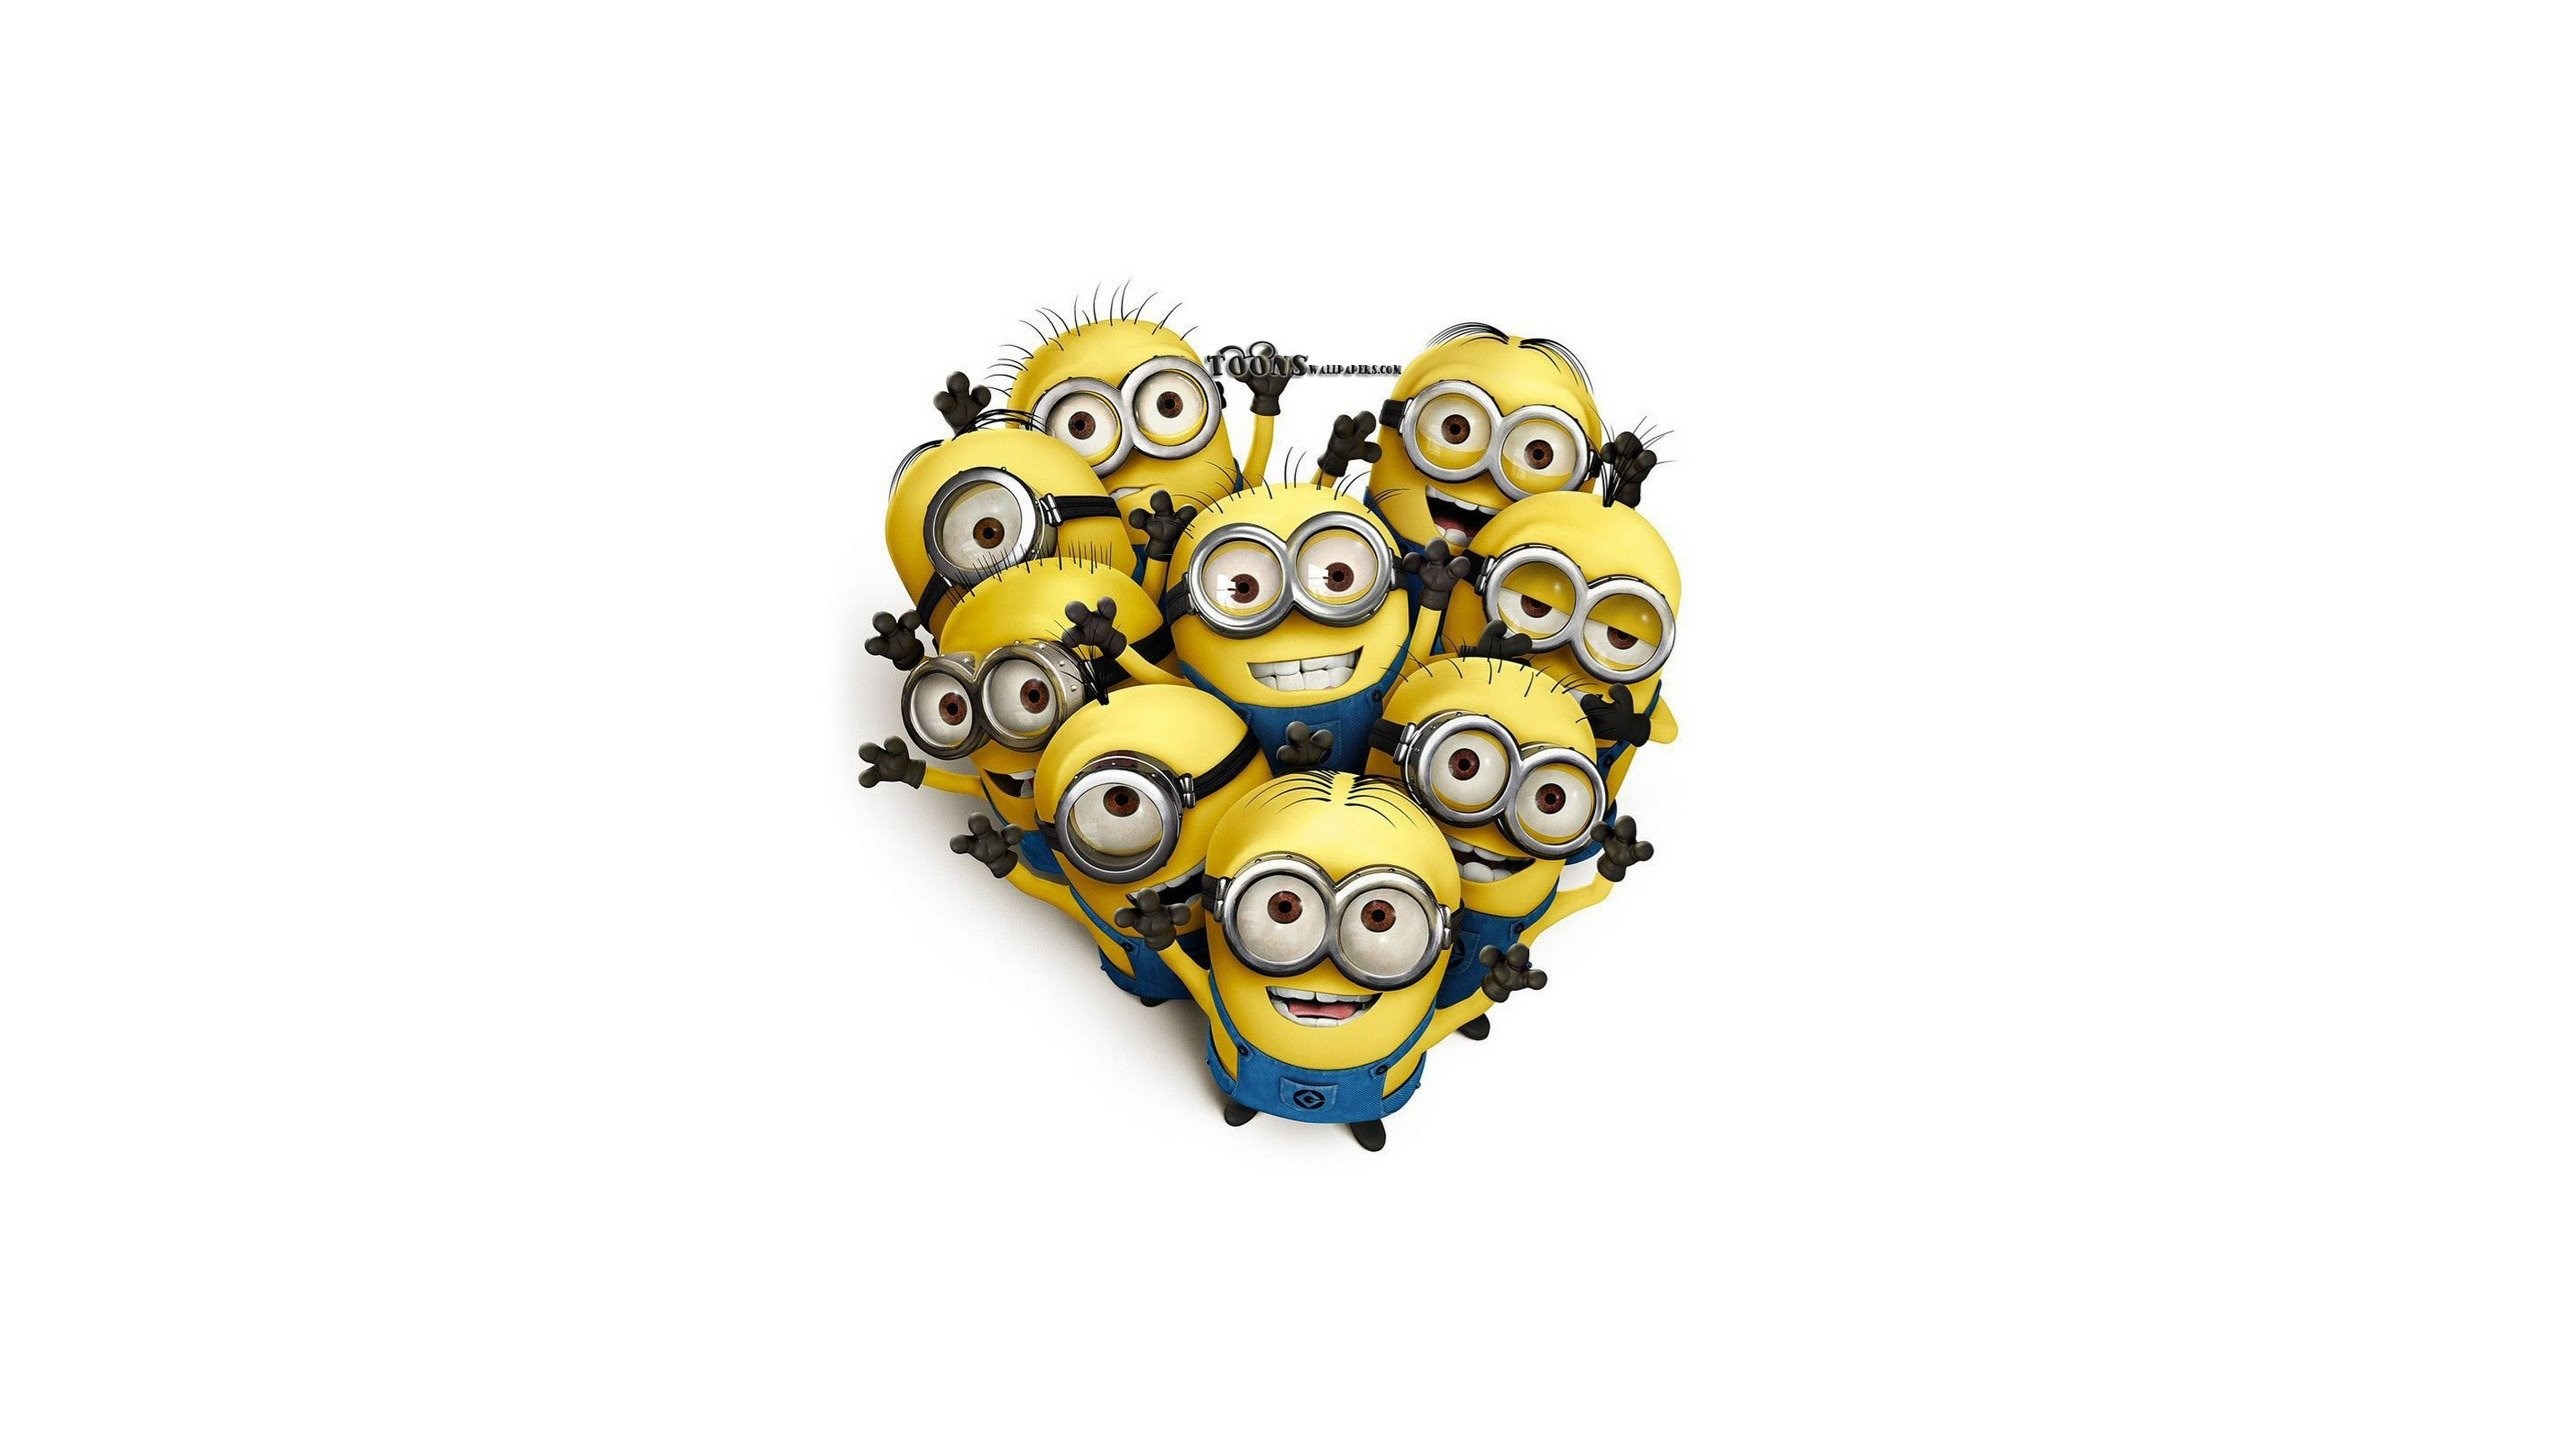 Download Minion Of Despicable Me Wallpapers Photos Gallery Popular 2560x144...